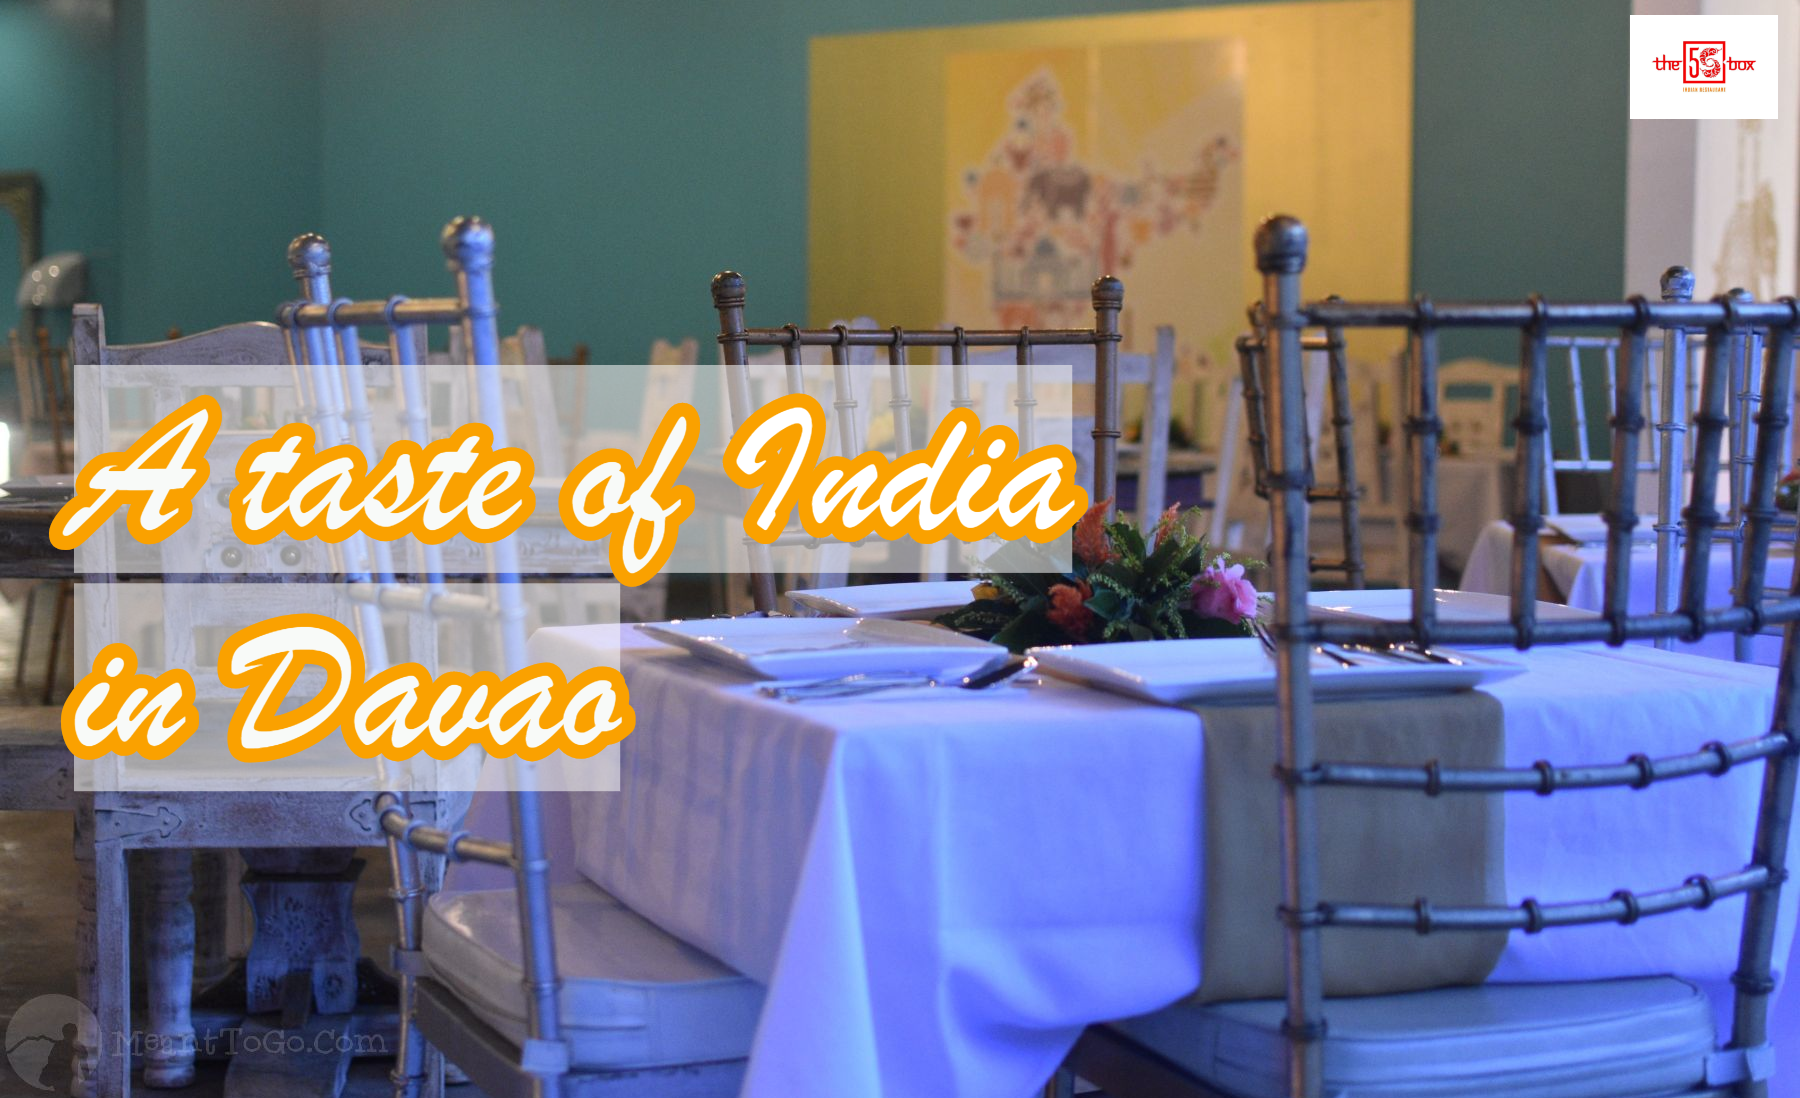 The 5S Box Indian Restaurant: A Taste of India in Davao